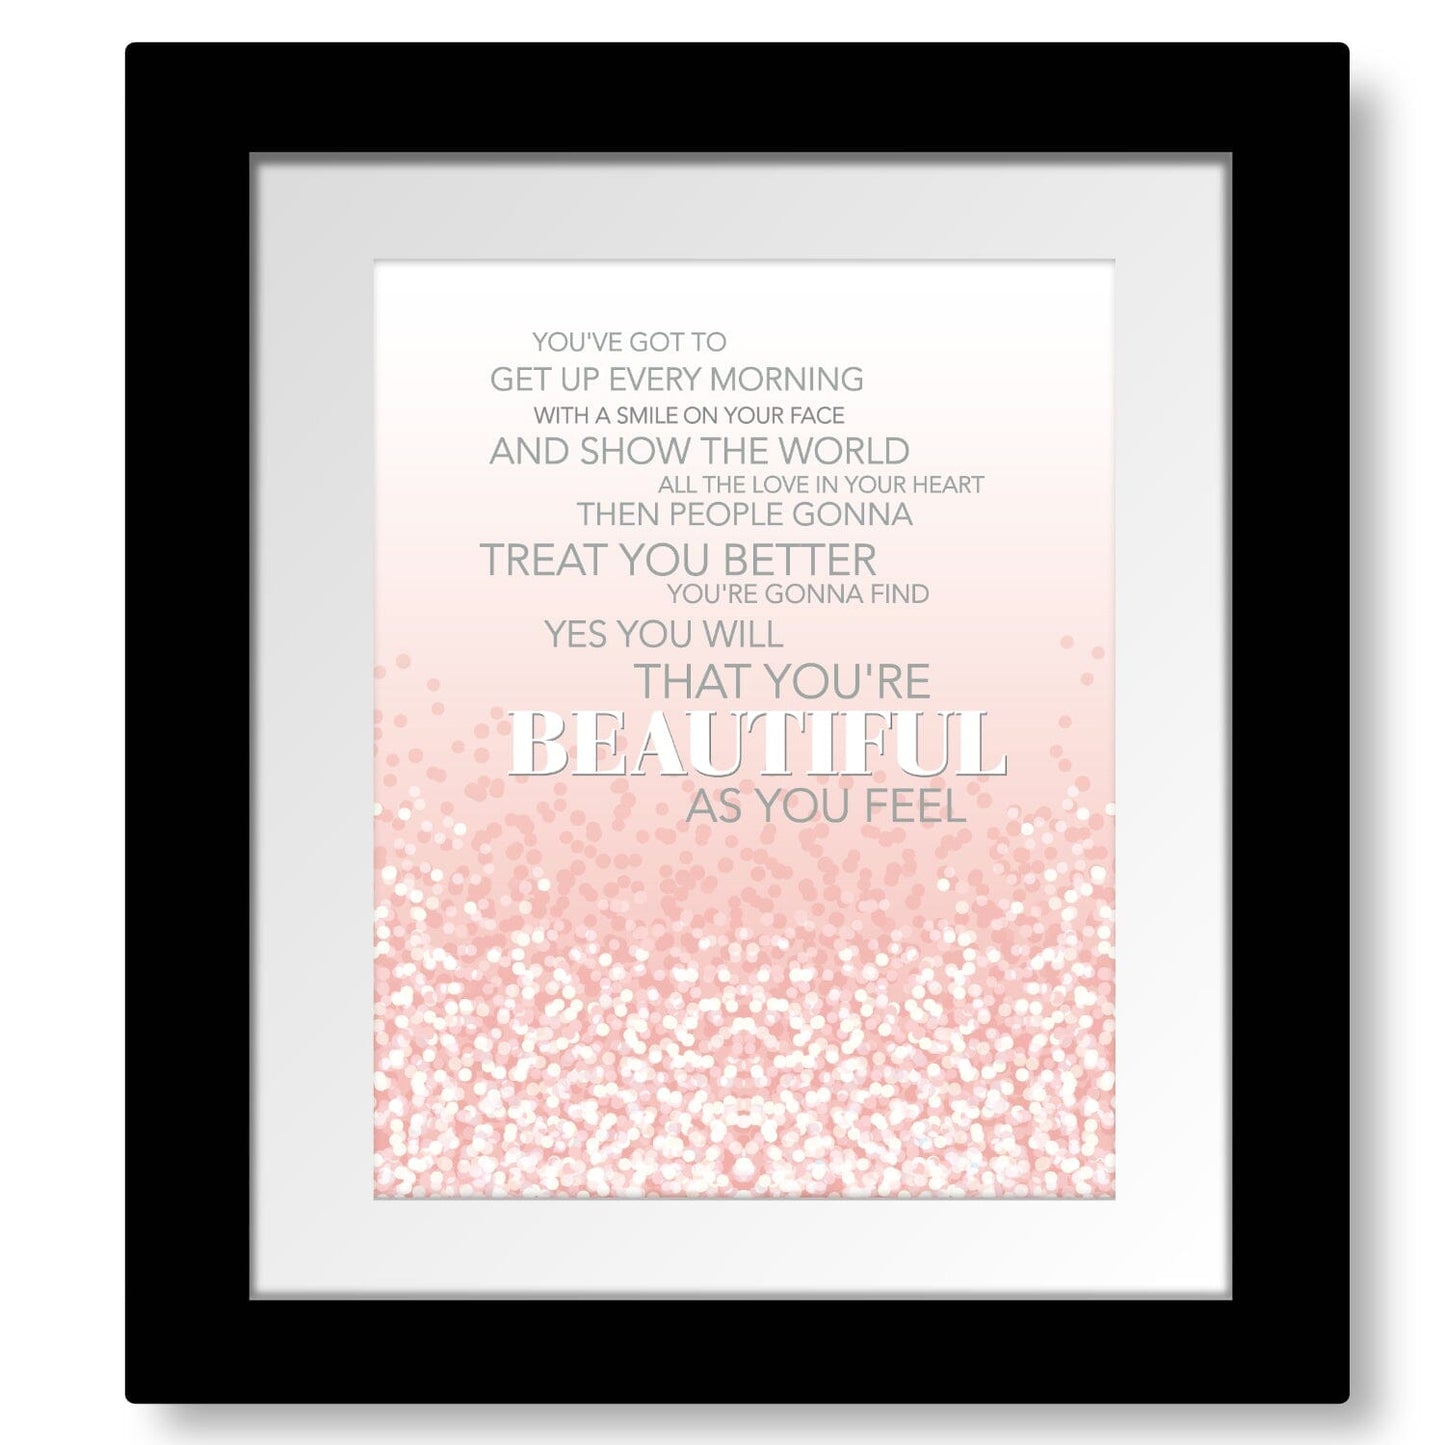 Beautiful by Carole King - 70s Love Song Lyrics Art Print Song Lyrics Art Song Lyrics Art 8x10 Framed and Matted Print 